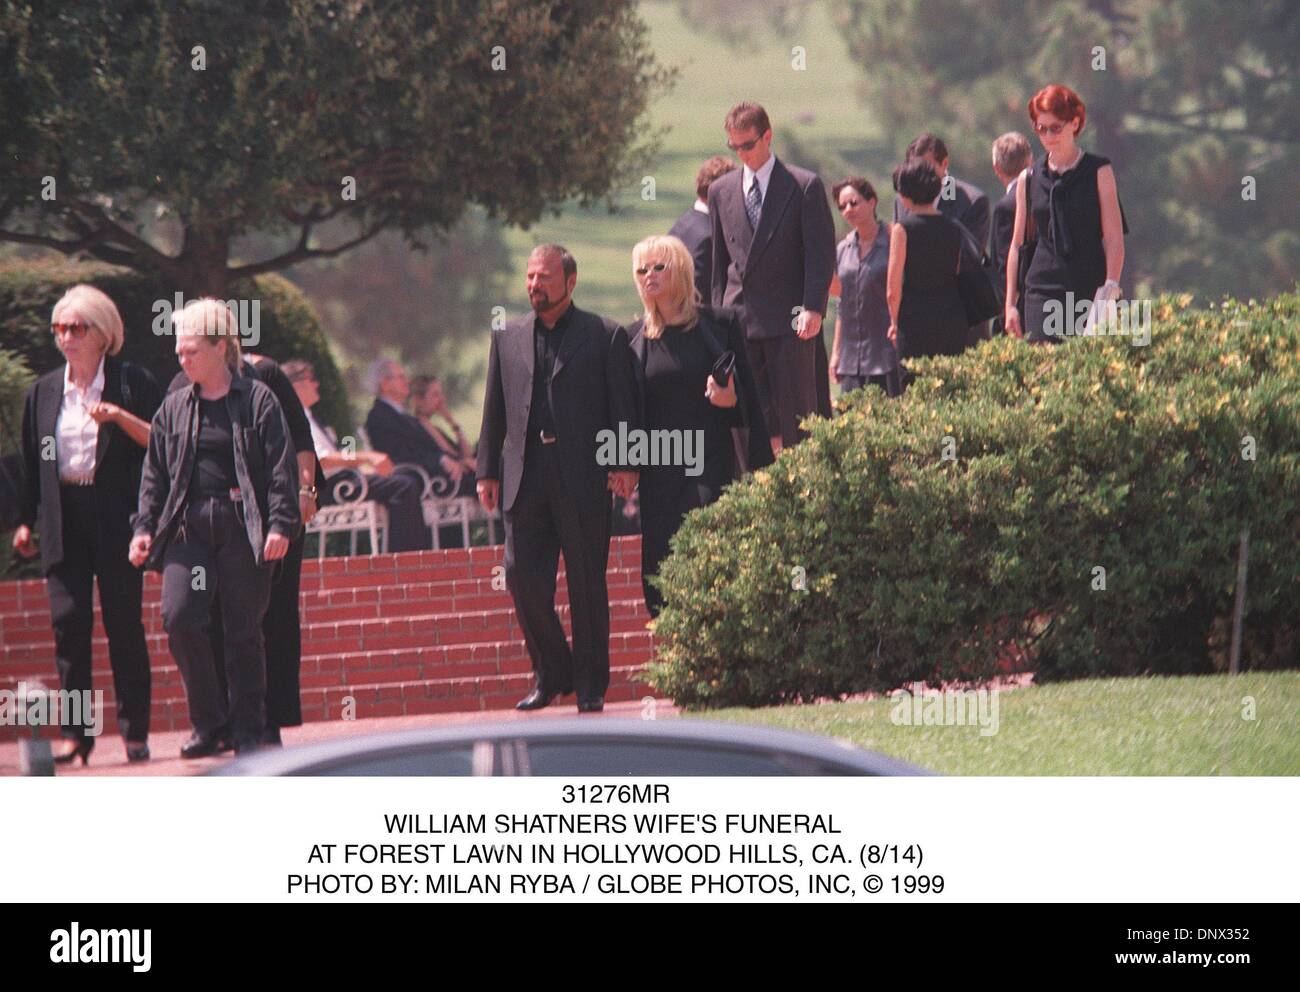 Aug. 14, 1999 - 31276MR.WILLIAM SHATNERS WIFE'S FUNERAL .AT FOREST LAWN ...